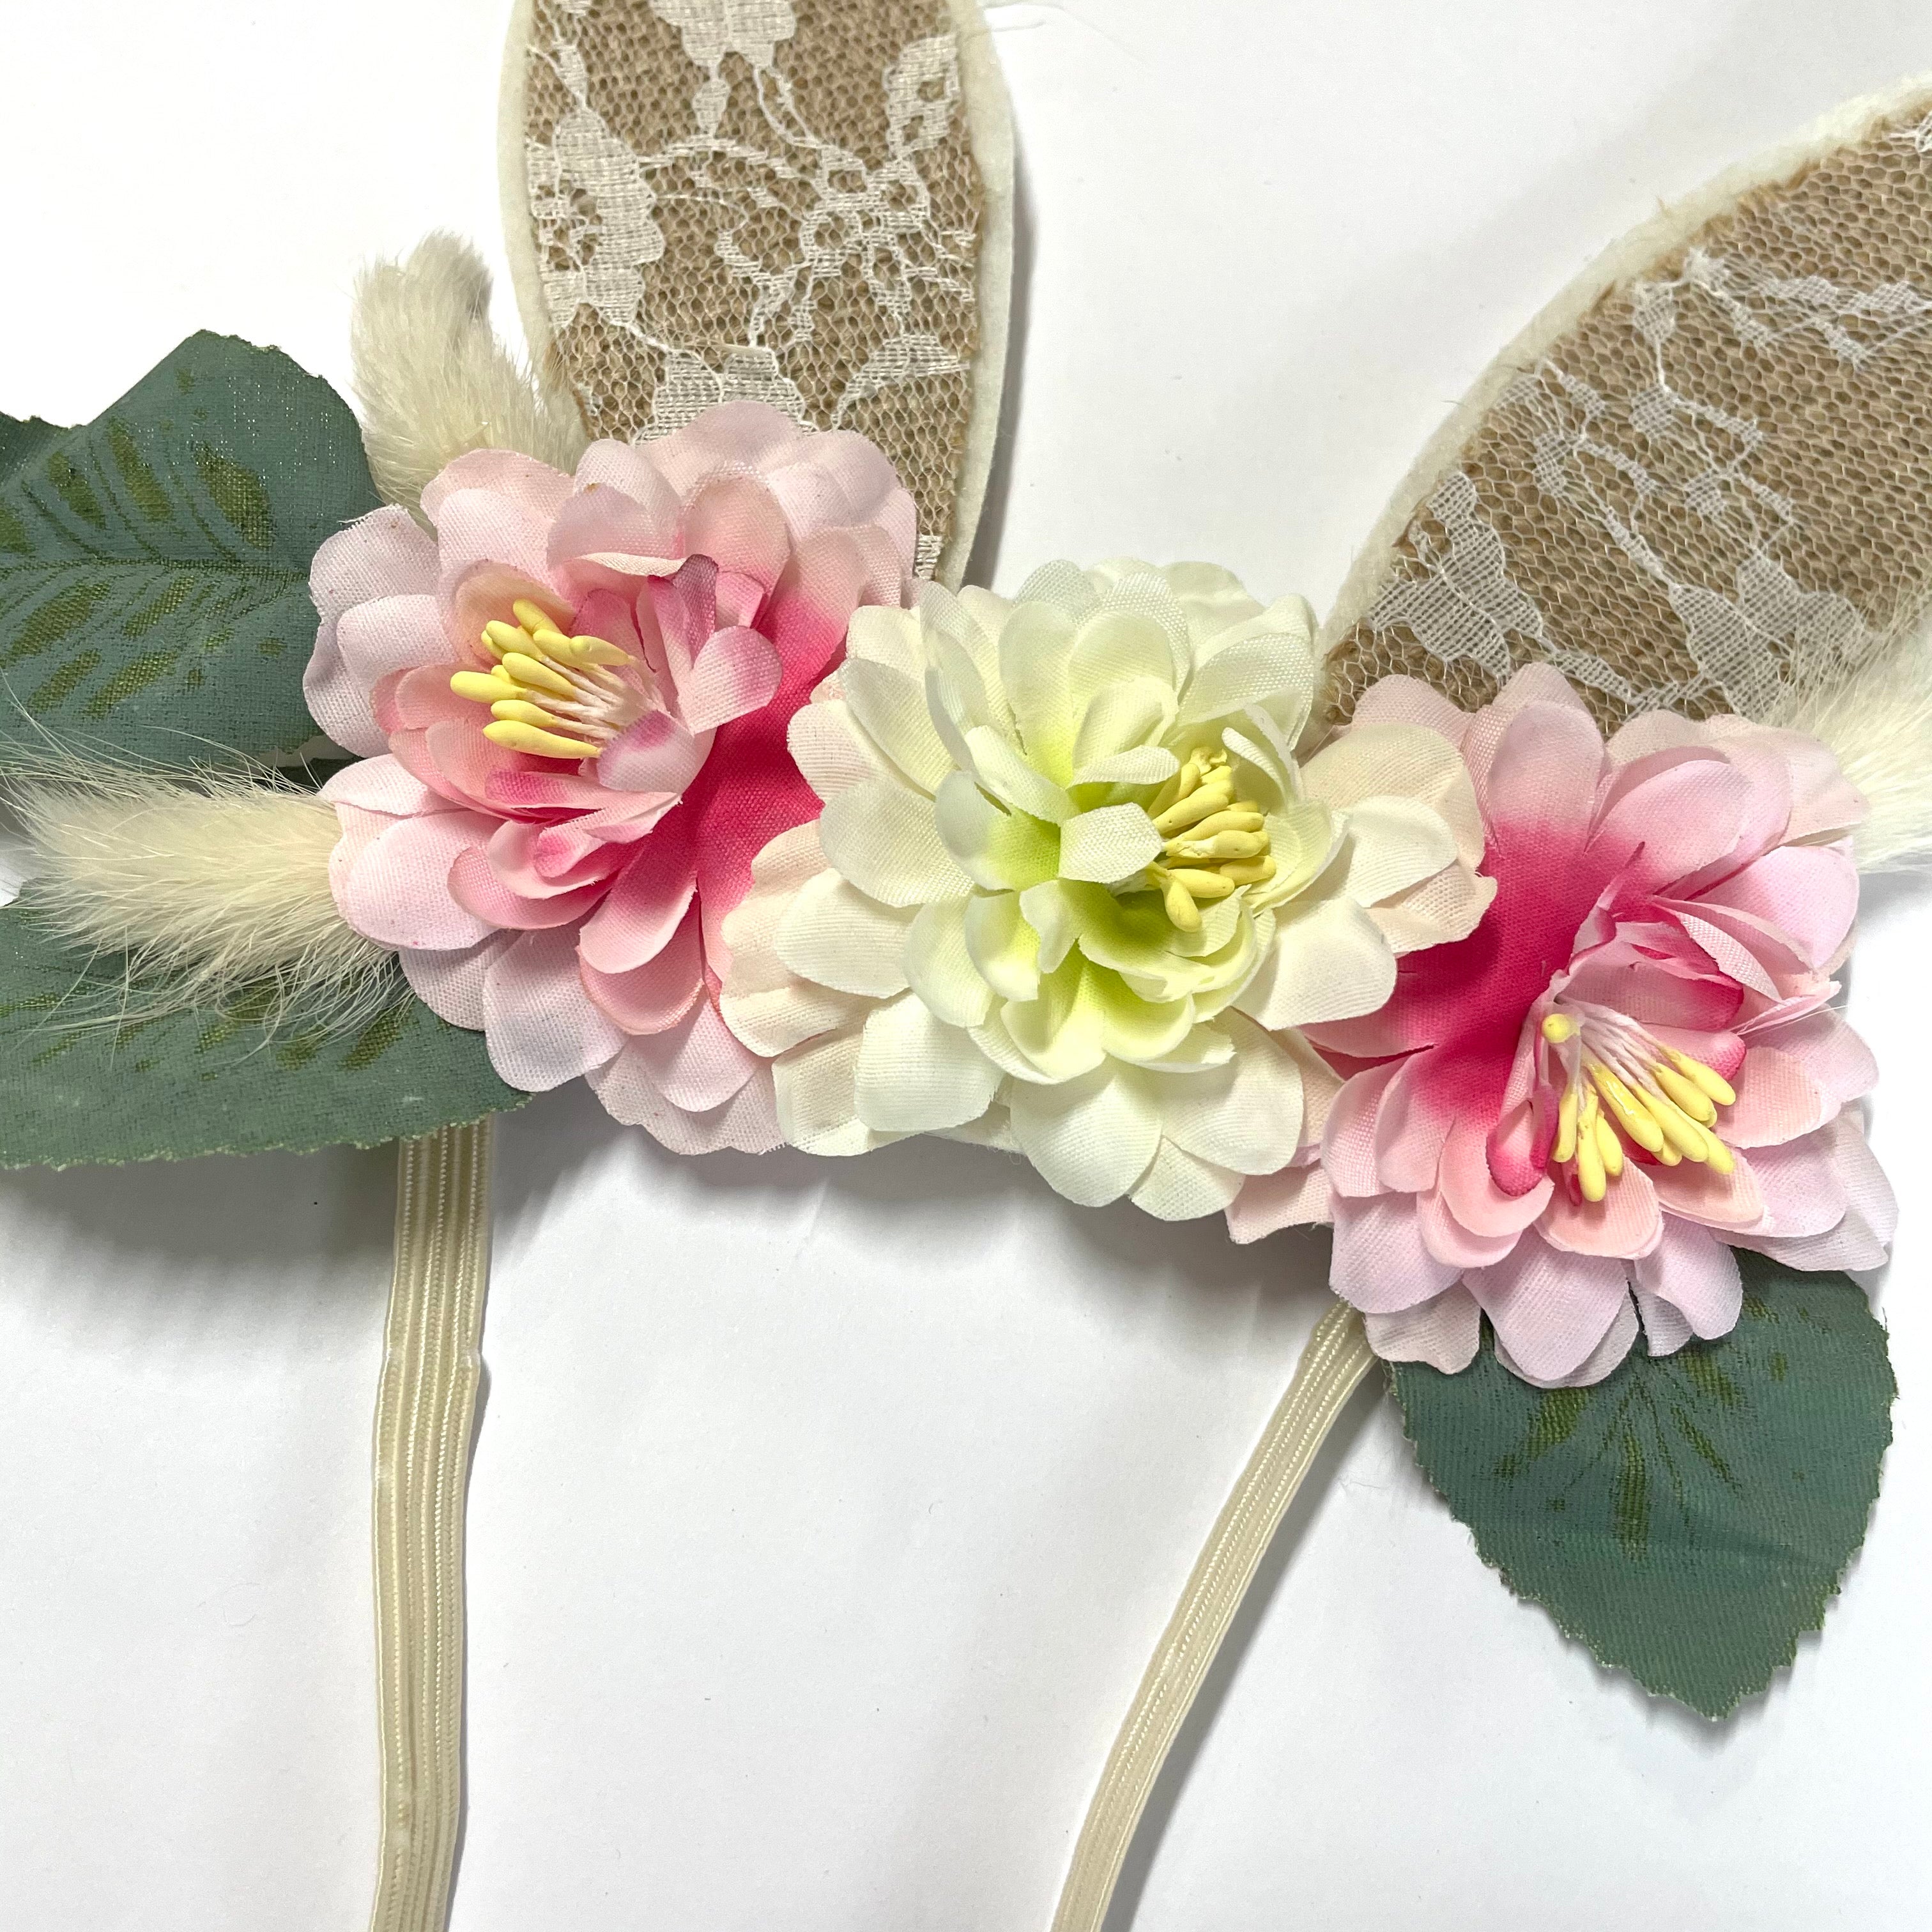 Easter Holiday Bunny Rabbit Floral Baby Girls Headband -Pink White (Style 7)